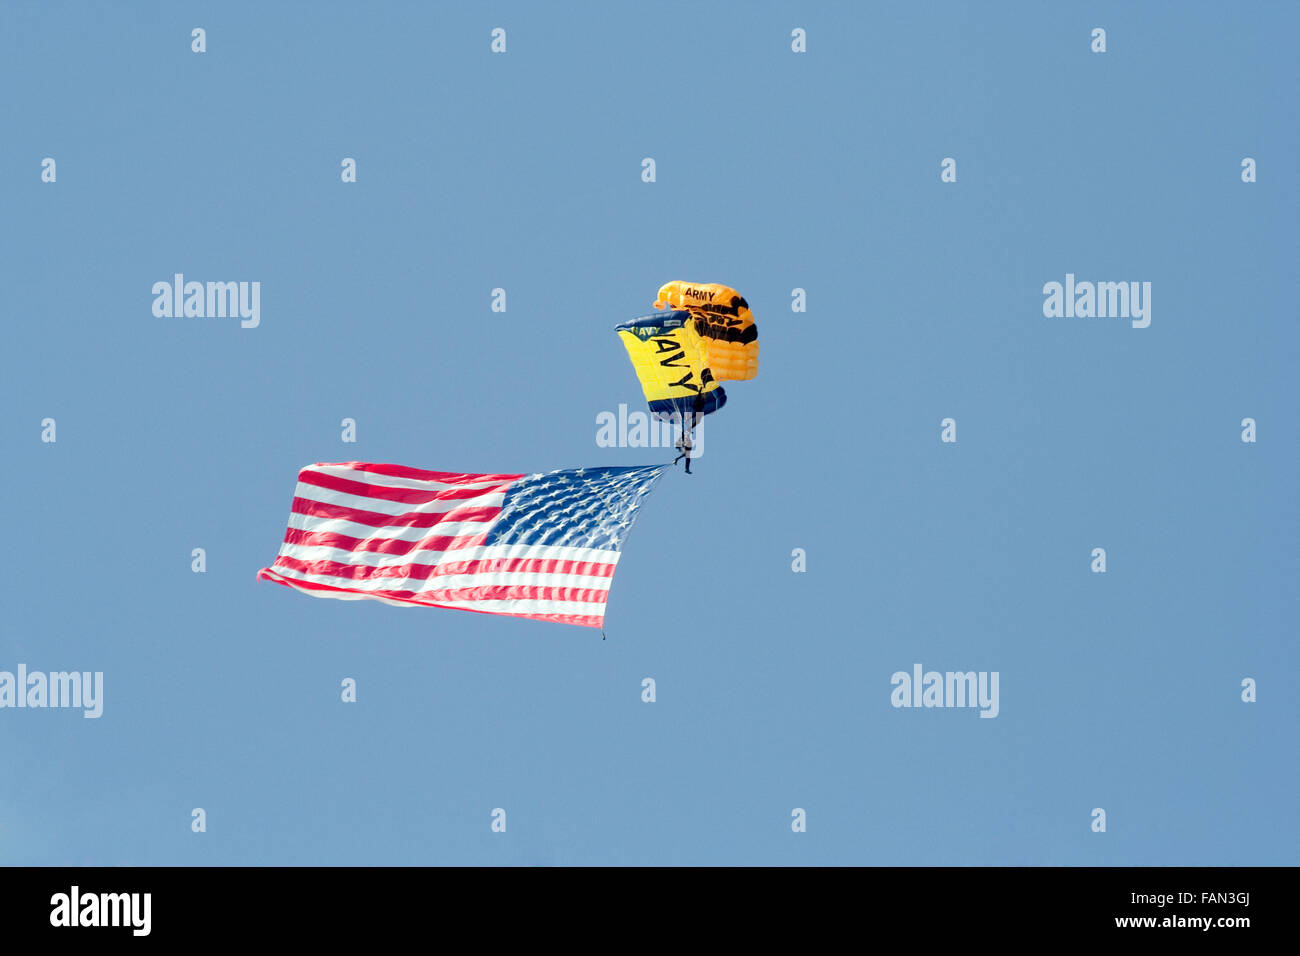 US Army Parachute Team. Chicago Air & Water Show 2016 Foto Stock